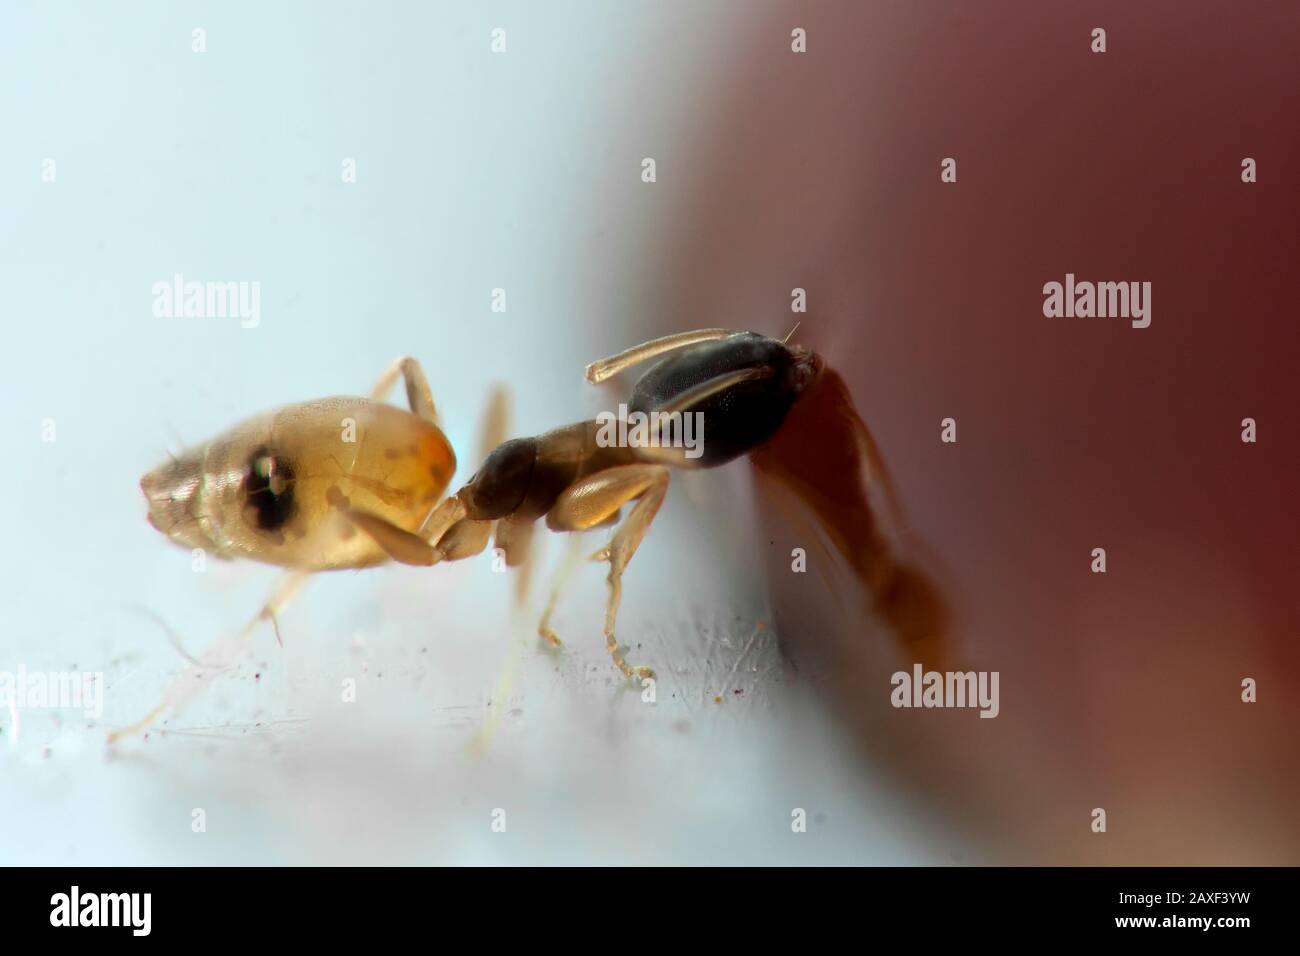 Small ghost ant (Tapinoma) feeding on a drop of sugar water, common house species Stock Photo